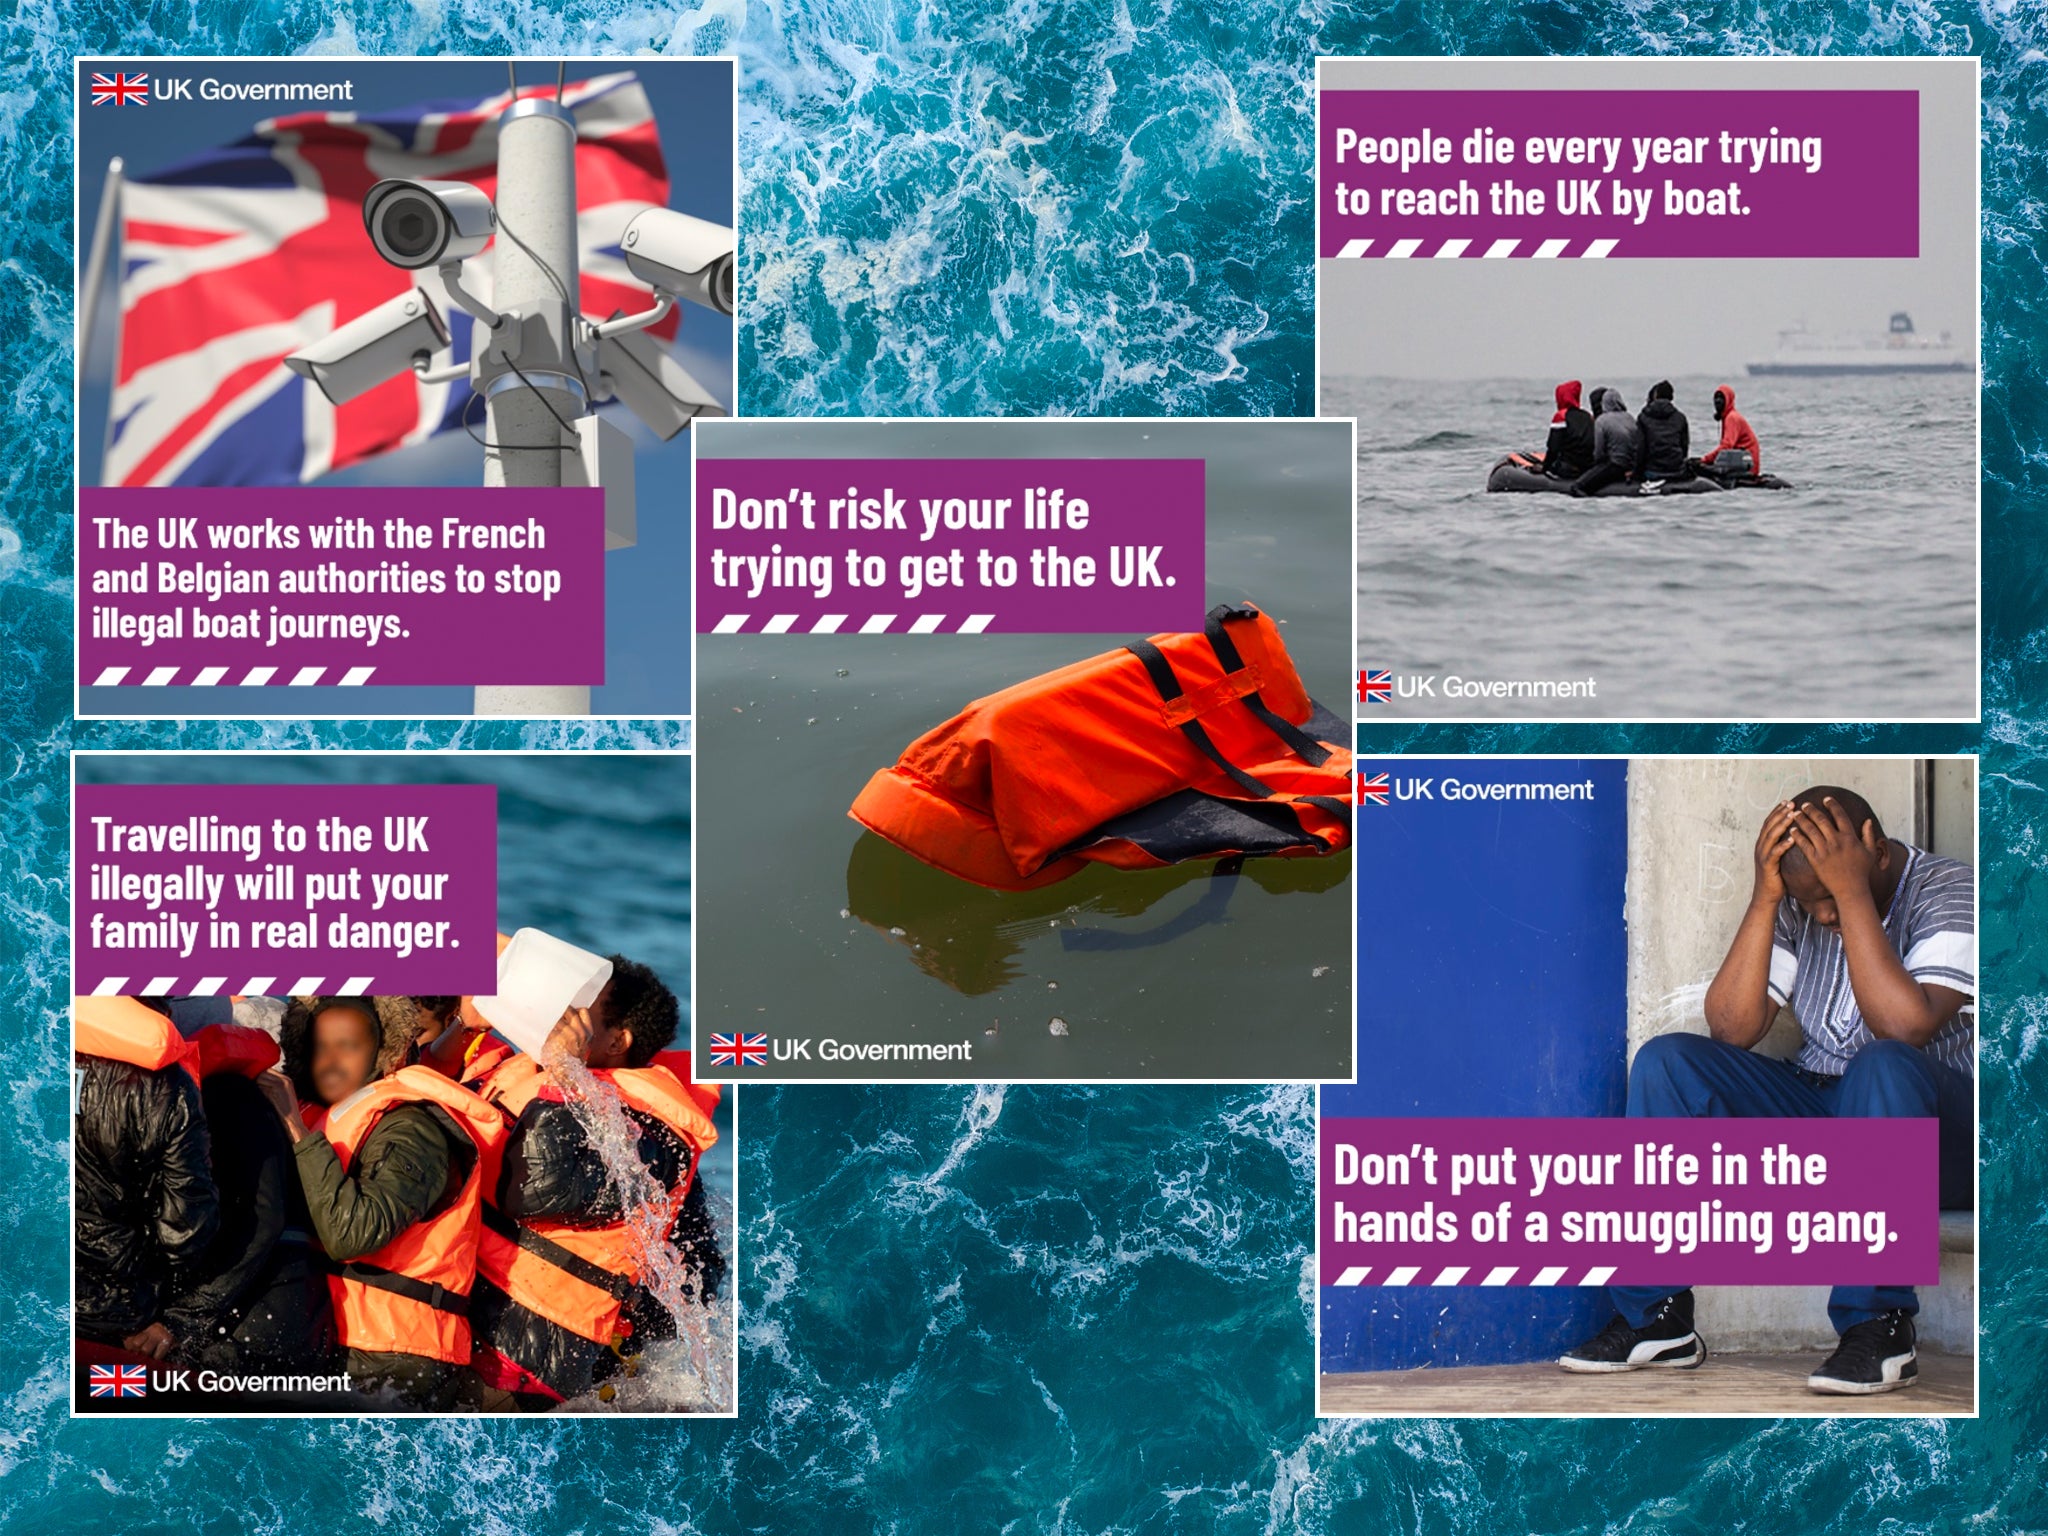 Some of the social media ads designed to deter migrants